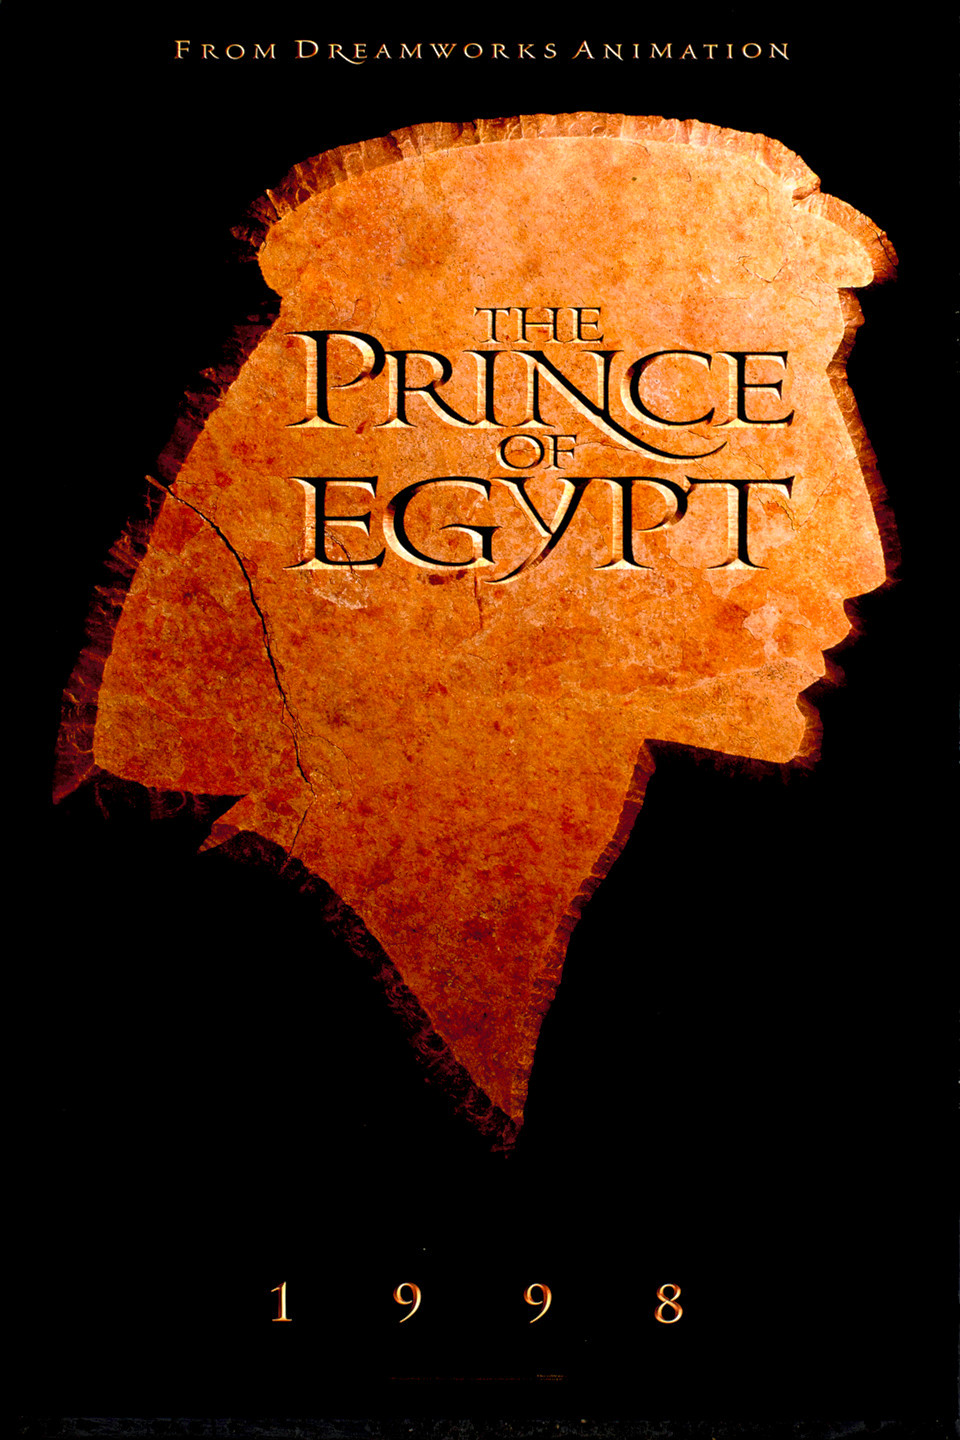 prince of egypt online free streaming